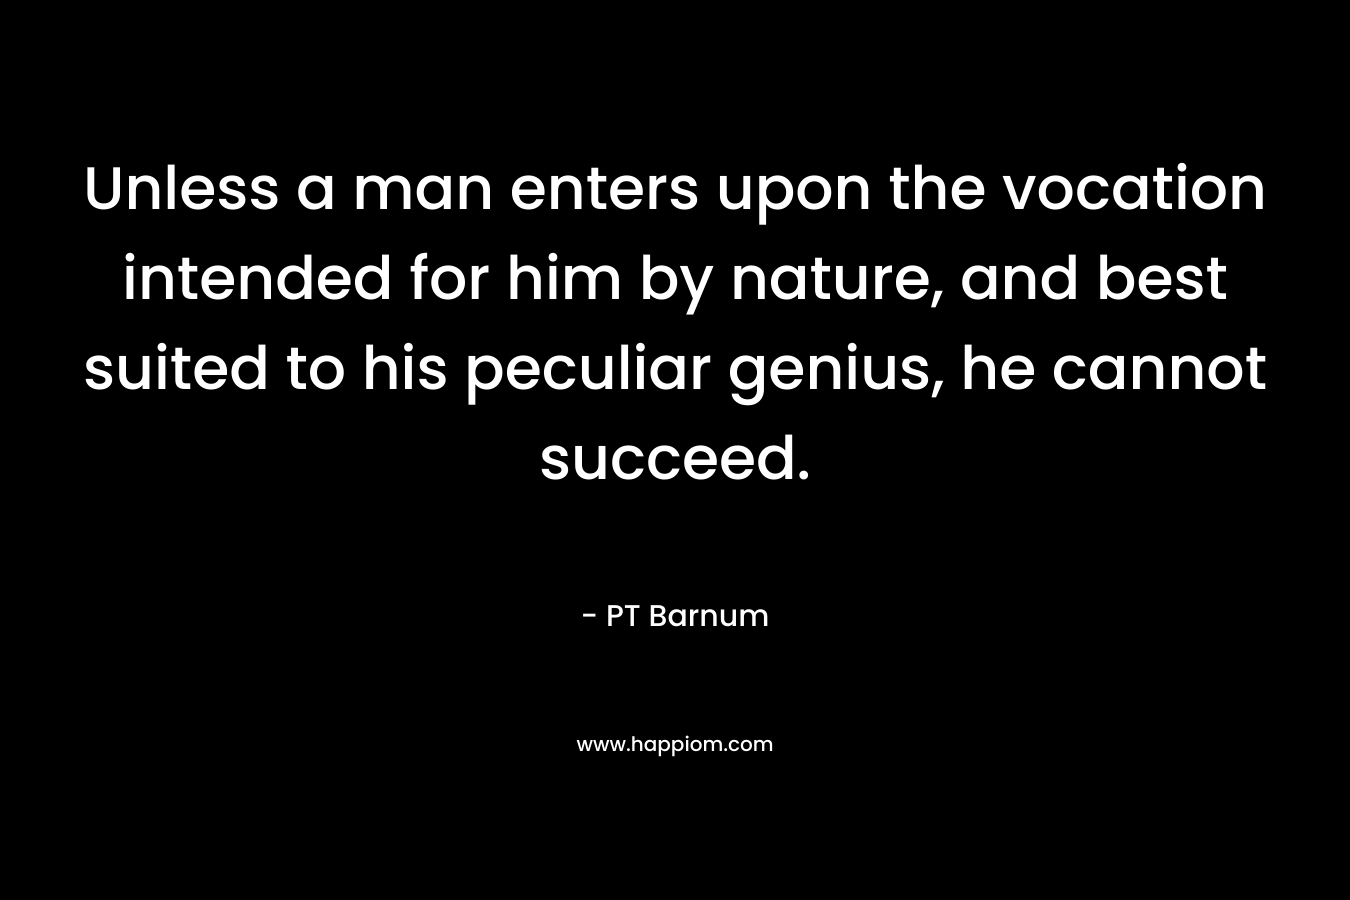 Unless a man enters upon the vocation intended for him by nature, and best suited to his peculiar genius, he cannot succeed.